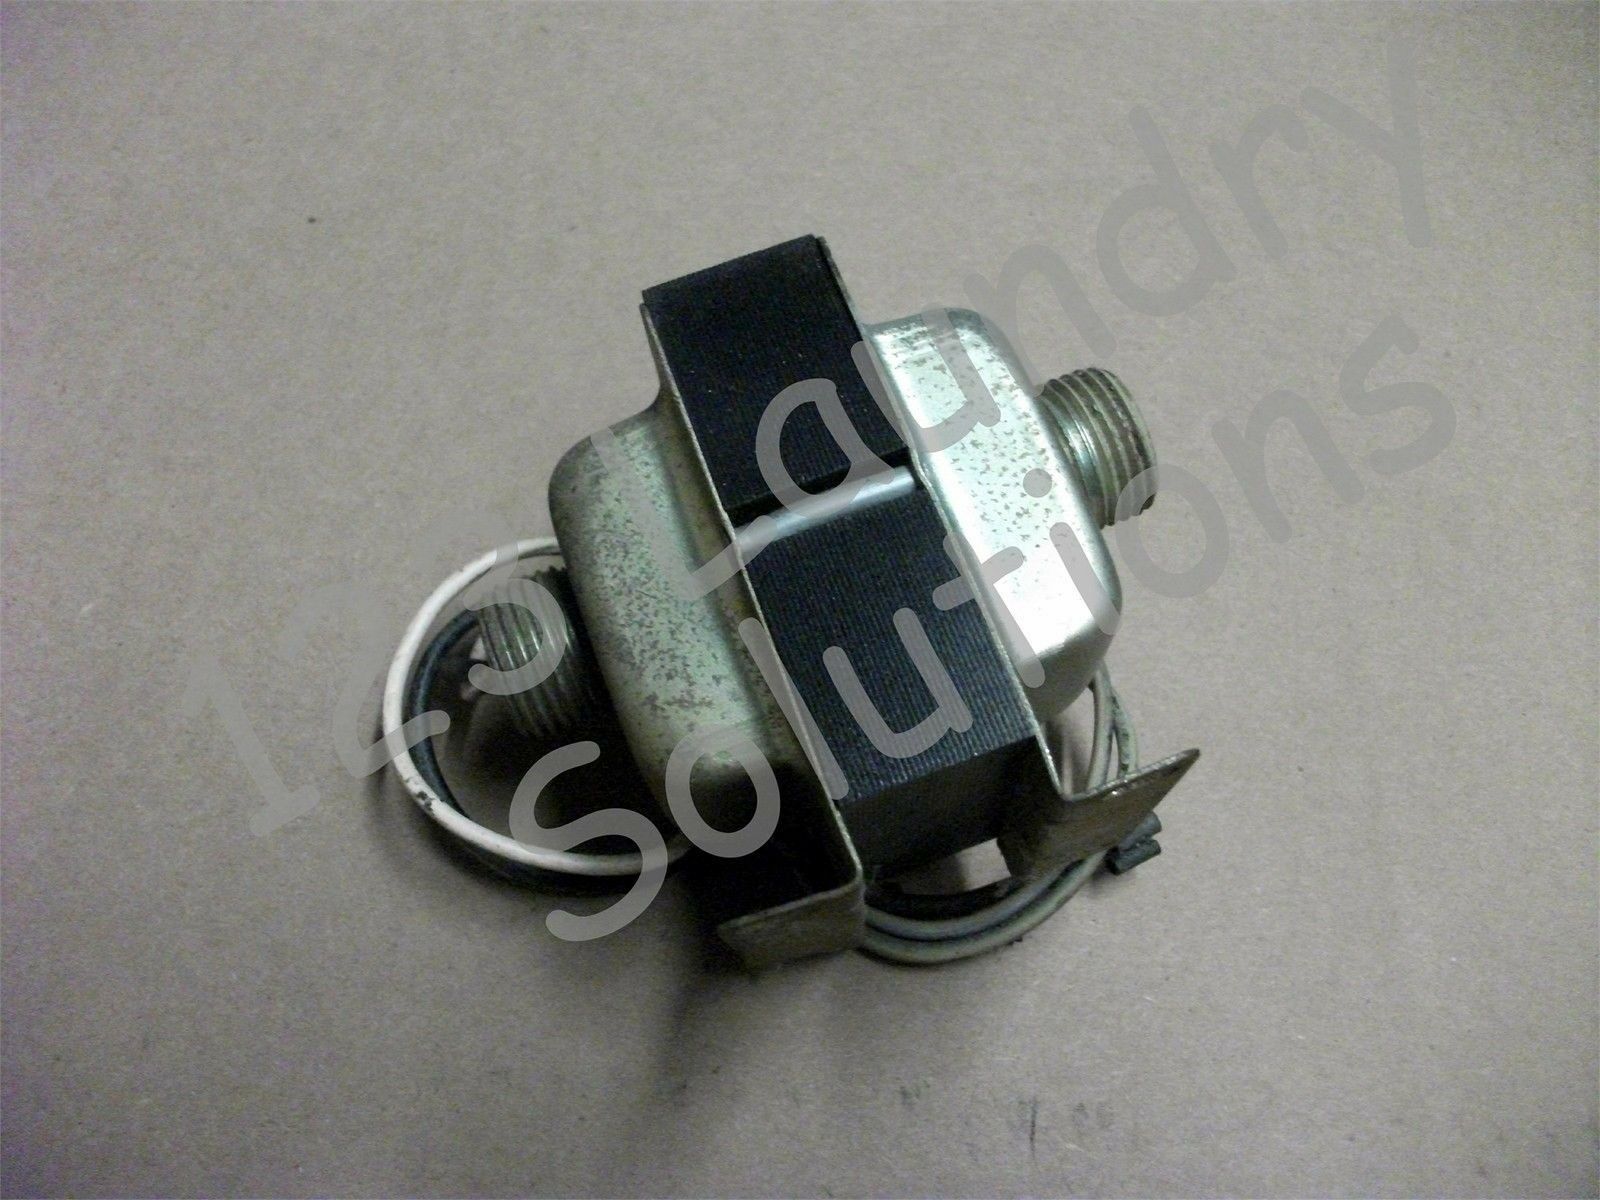 Dryer Class 2 Transformer 120v 50/60 Hz Sec for Speed Queen Y65AS-2 [Used] - $24.74